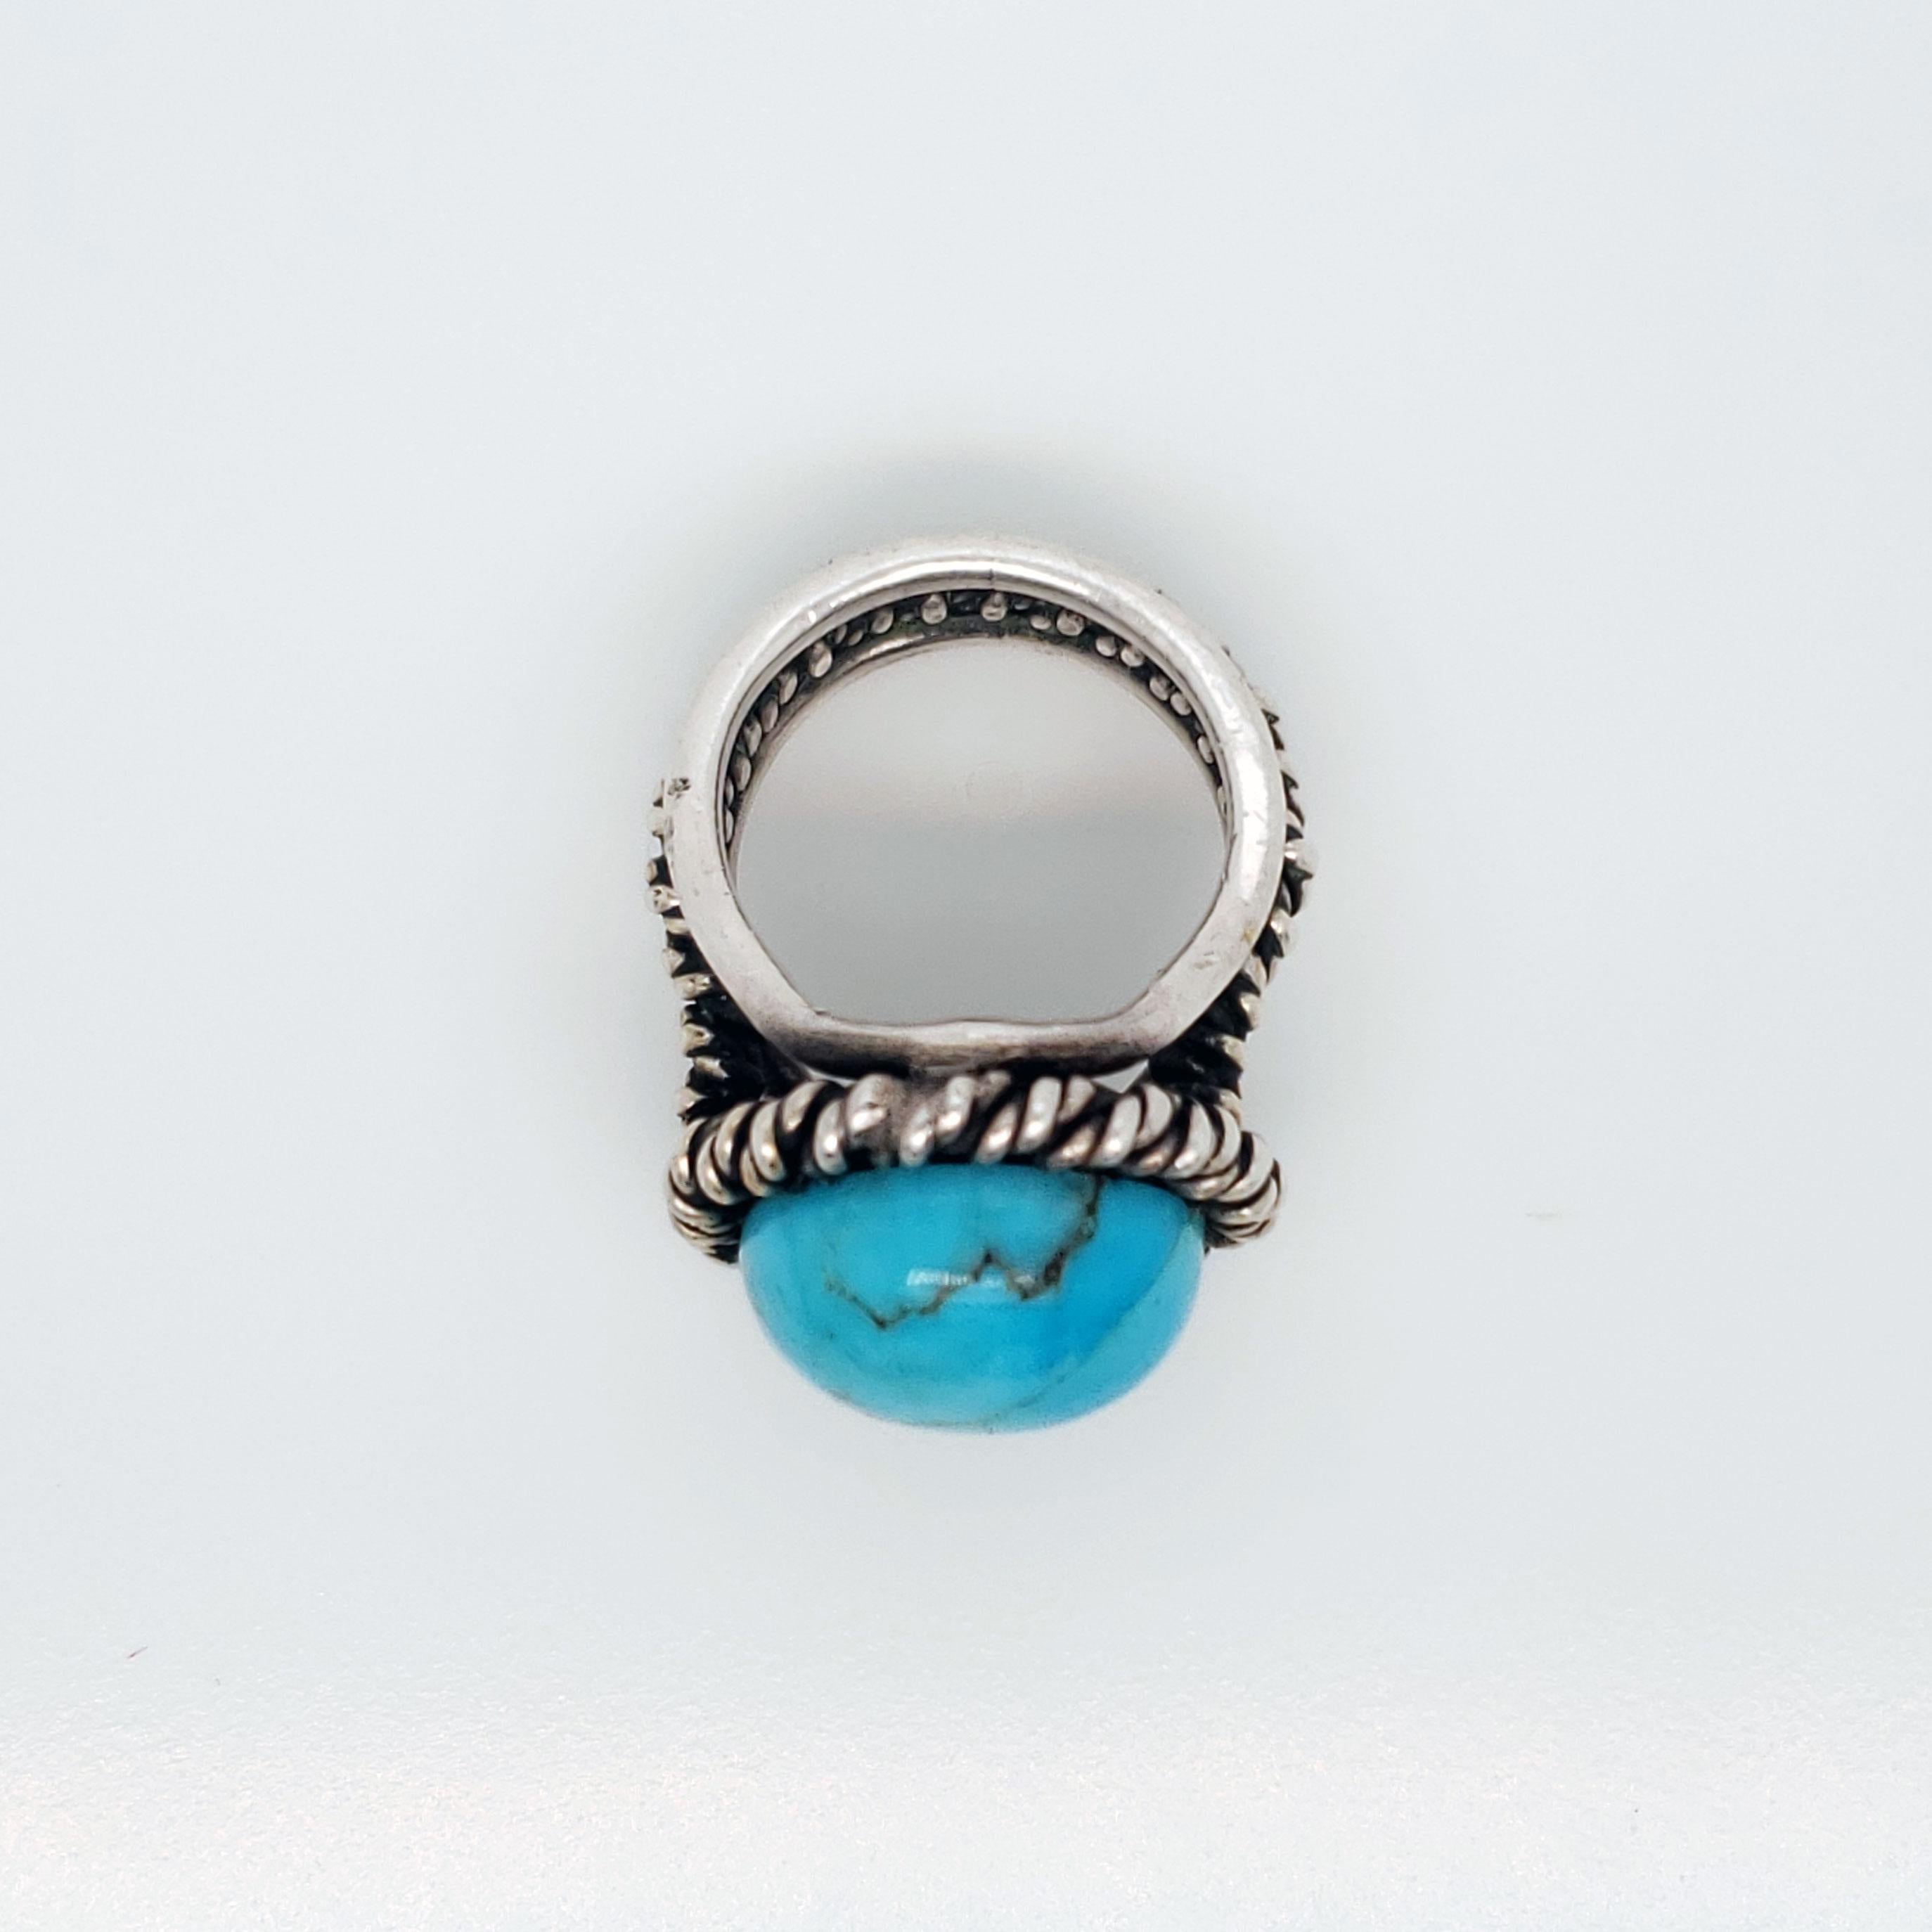 Modernist 1960s Fred Skagg Handmade Sterling Silver and Turquoise Ring